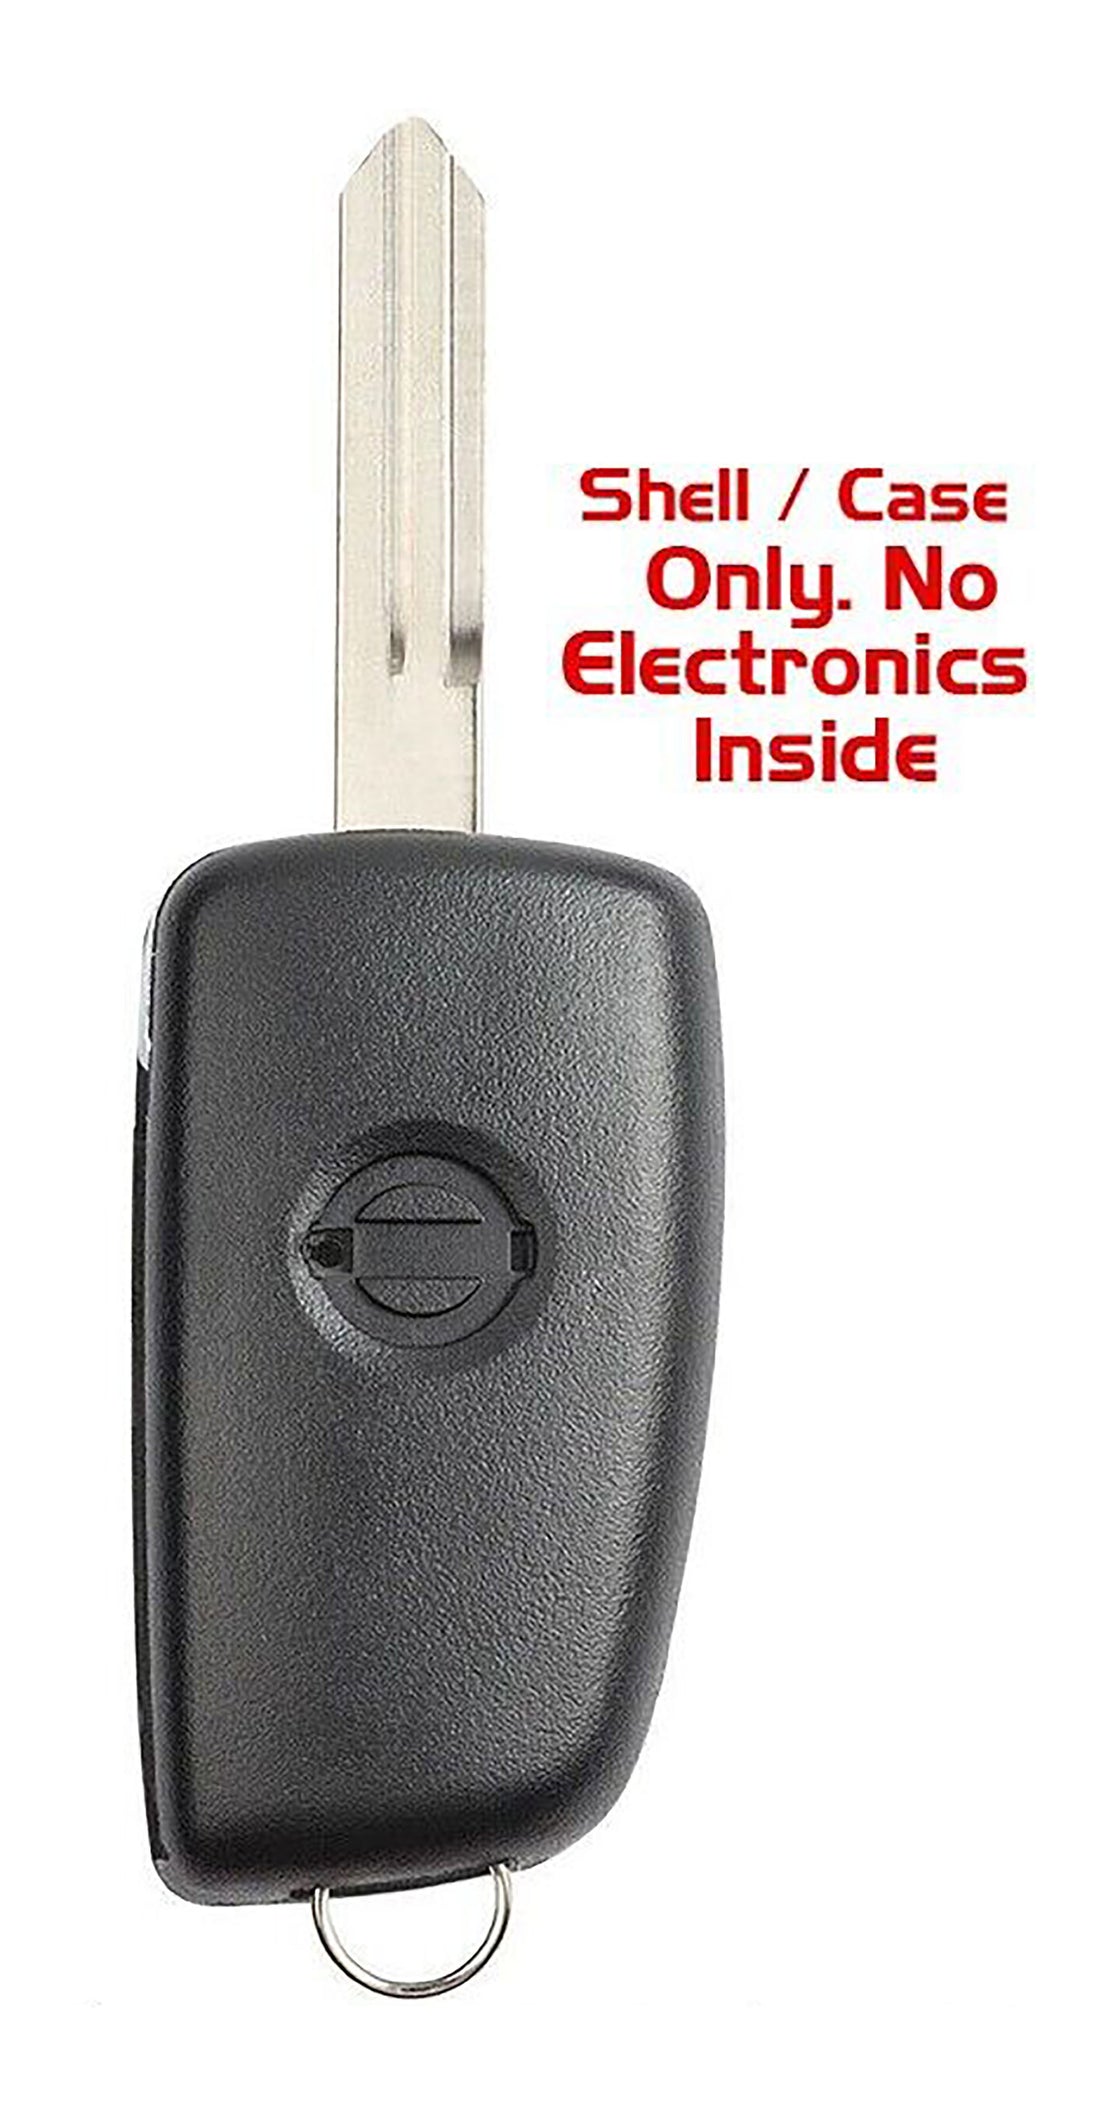 1x New Replacement Key Fob Remote SHELL / CASE Compatible with & Fit For 2014-2020 Nissan Rogue - MPN CWTWB1G767-04 (NO electronics or Chip inside)